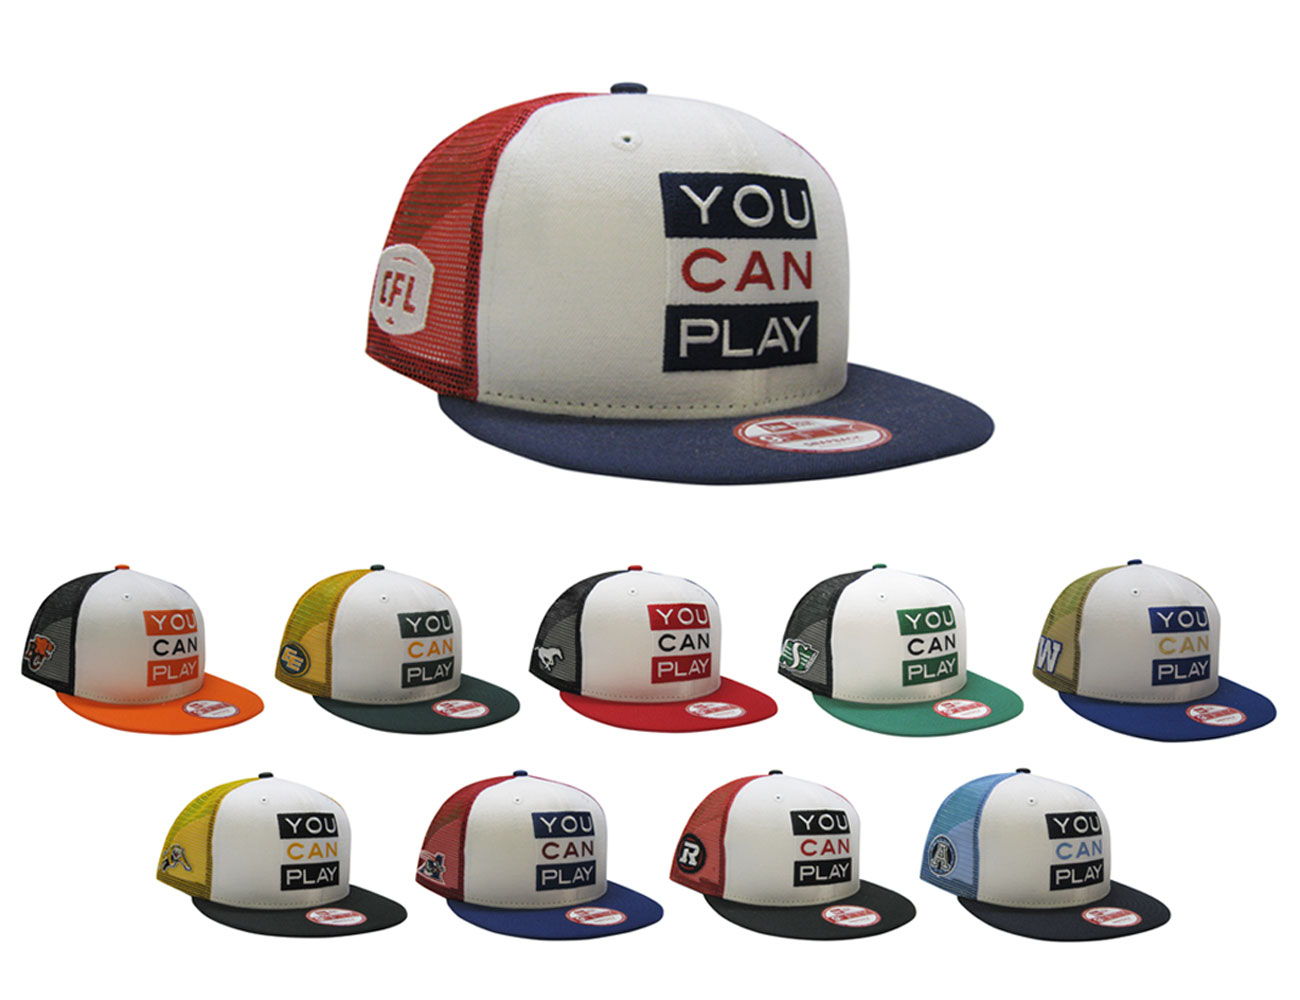 CFL/YCP New Era 950 Limited Edition Snapback collection.